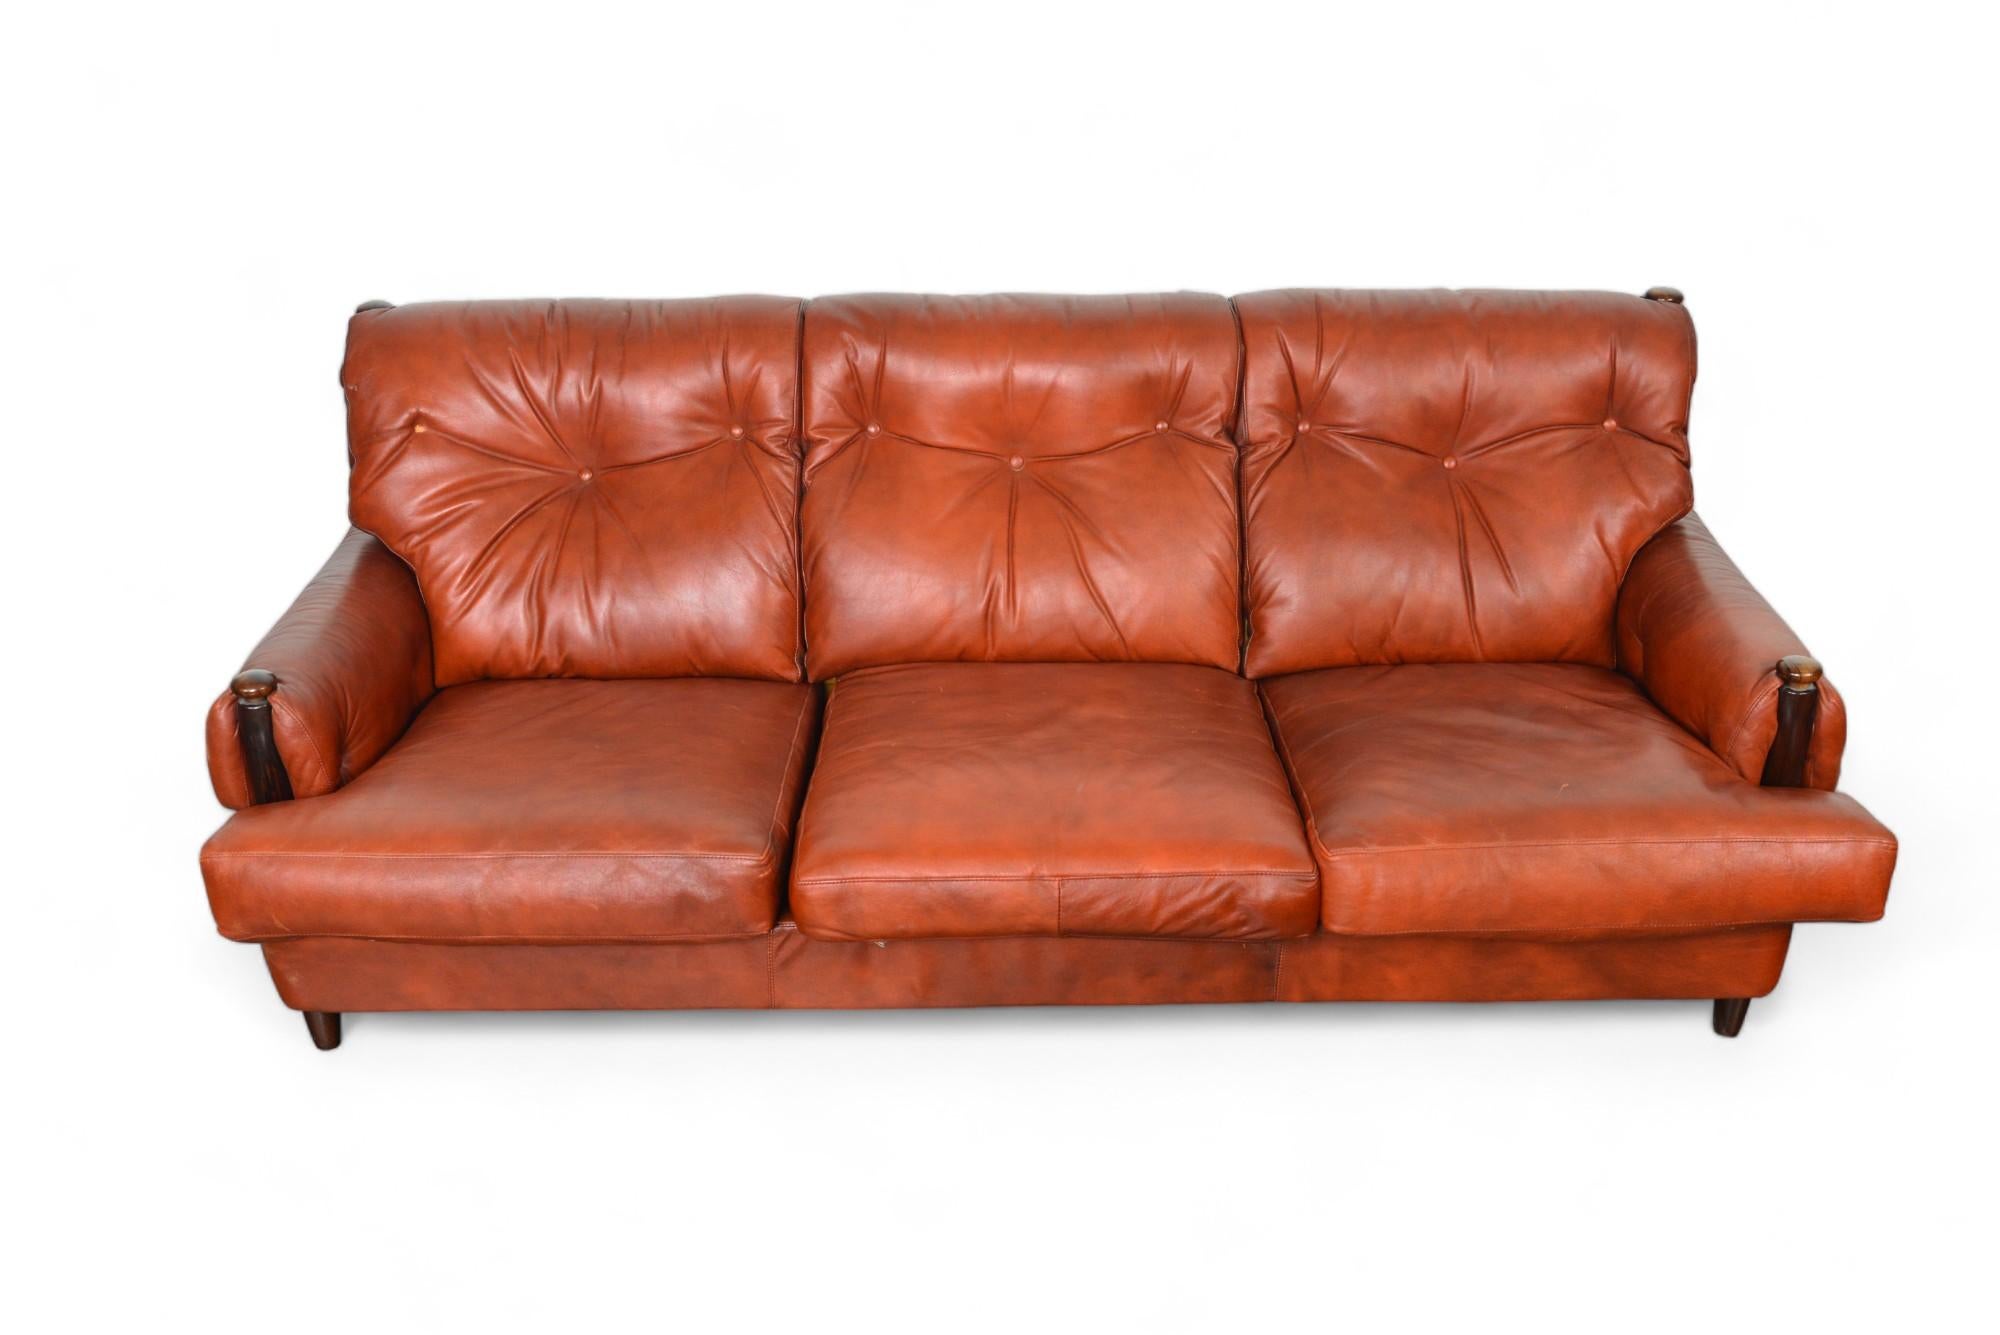 Origin: Germany
Designer: Unknown
Manufacturer: Unknown
Era: 1960s
Materials: Rosewood, Leather
Measurements: 75″ wide x 33